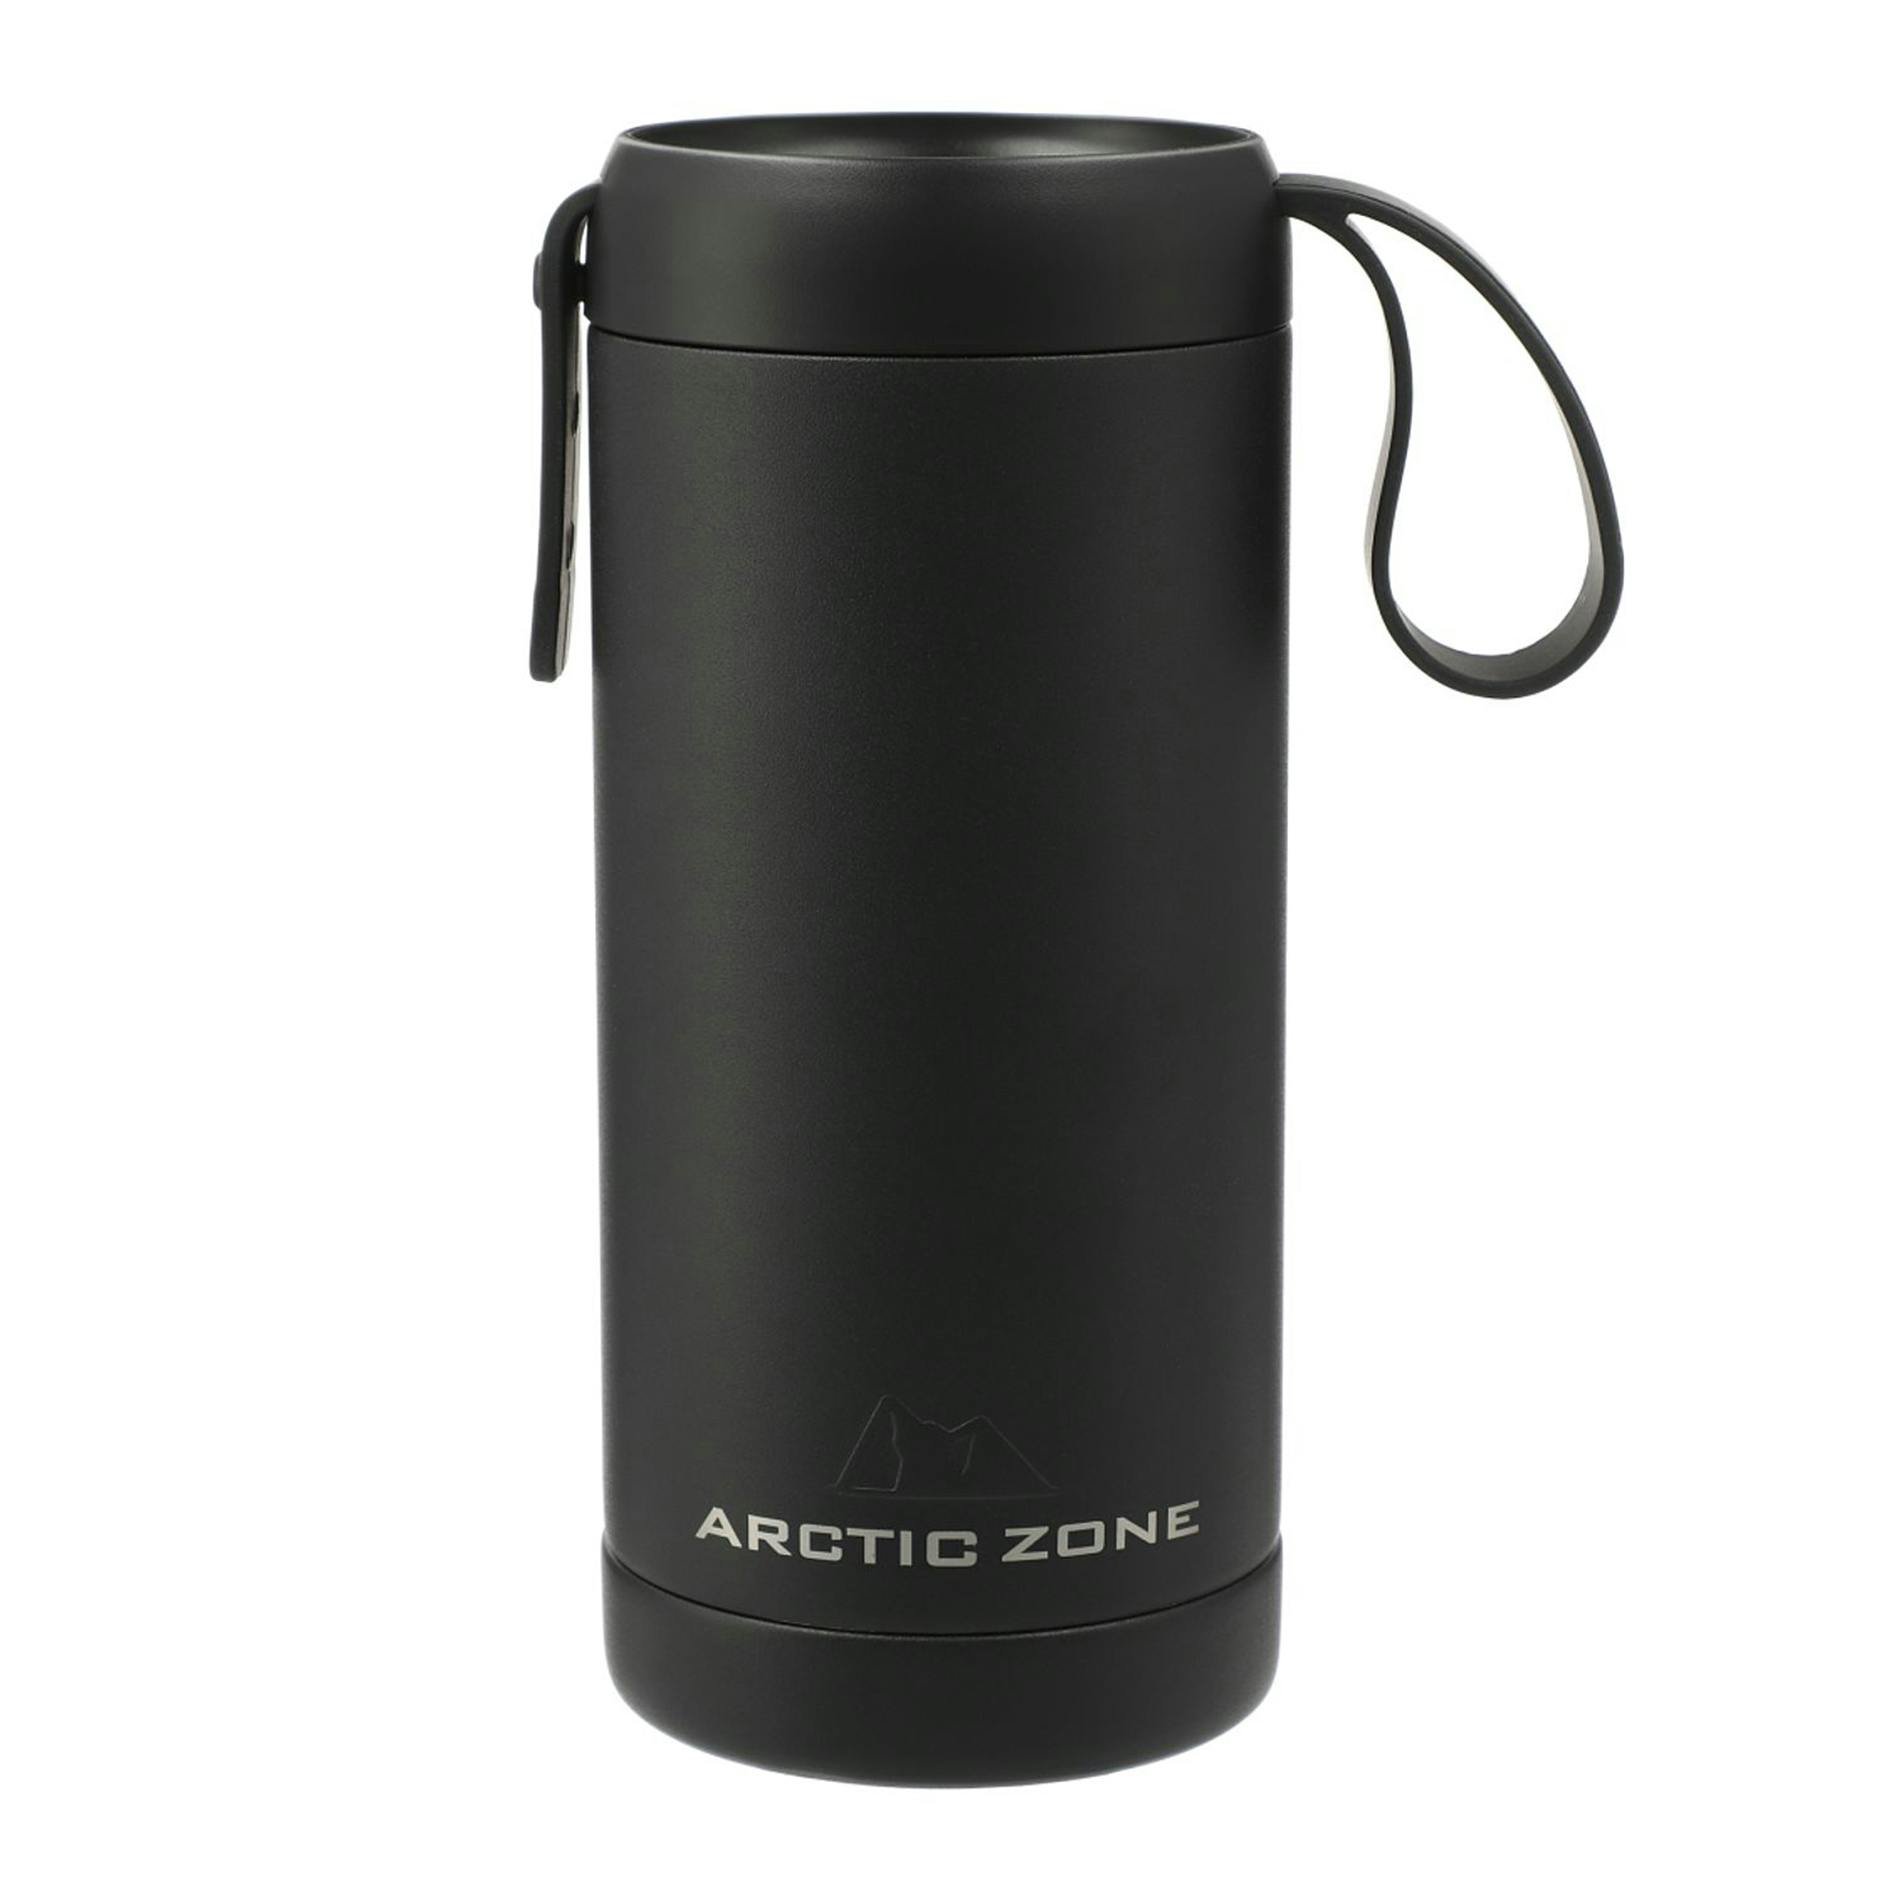 Arctic Zone Titan 20 oz Meal Container - additional Image 1